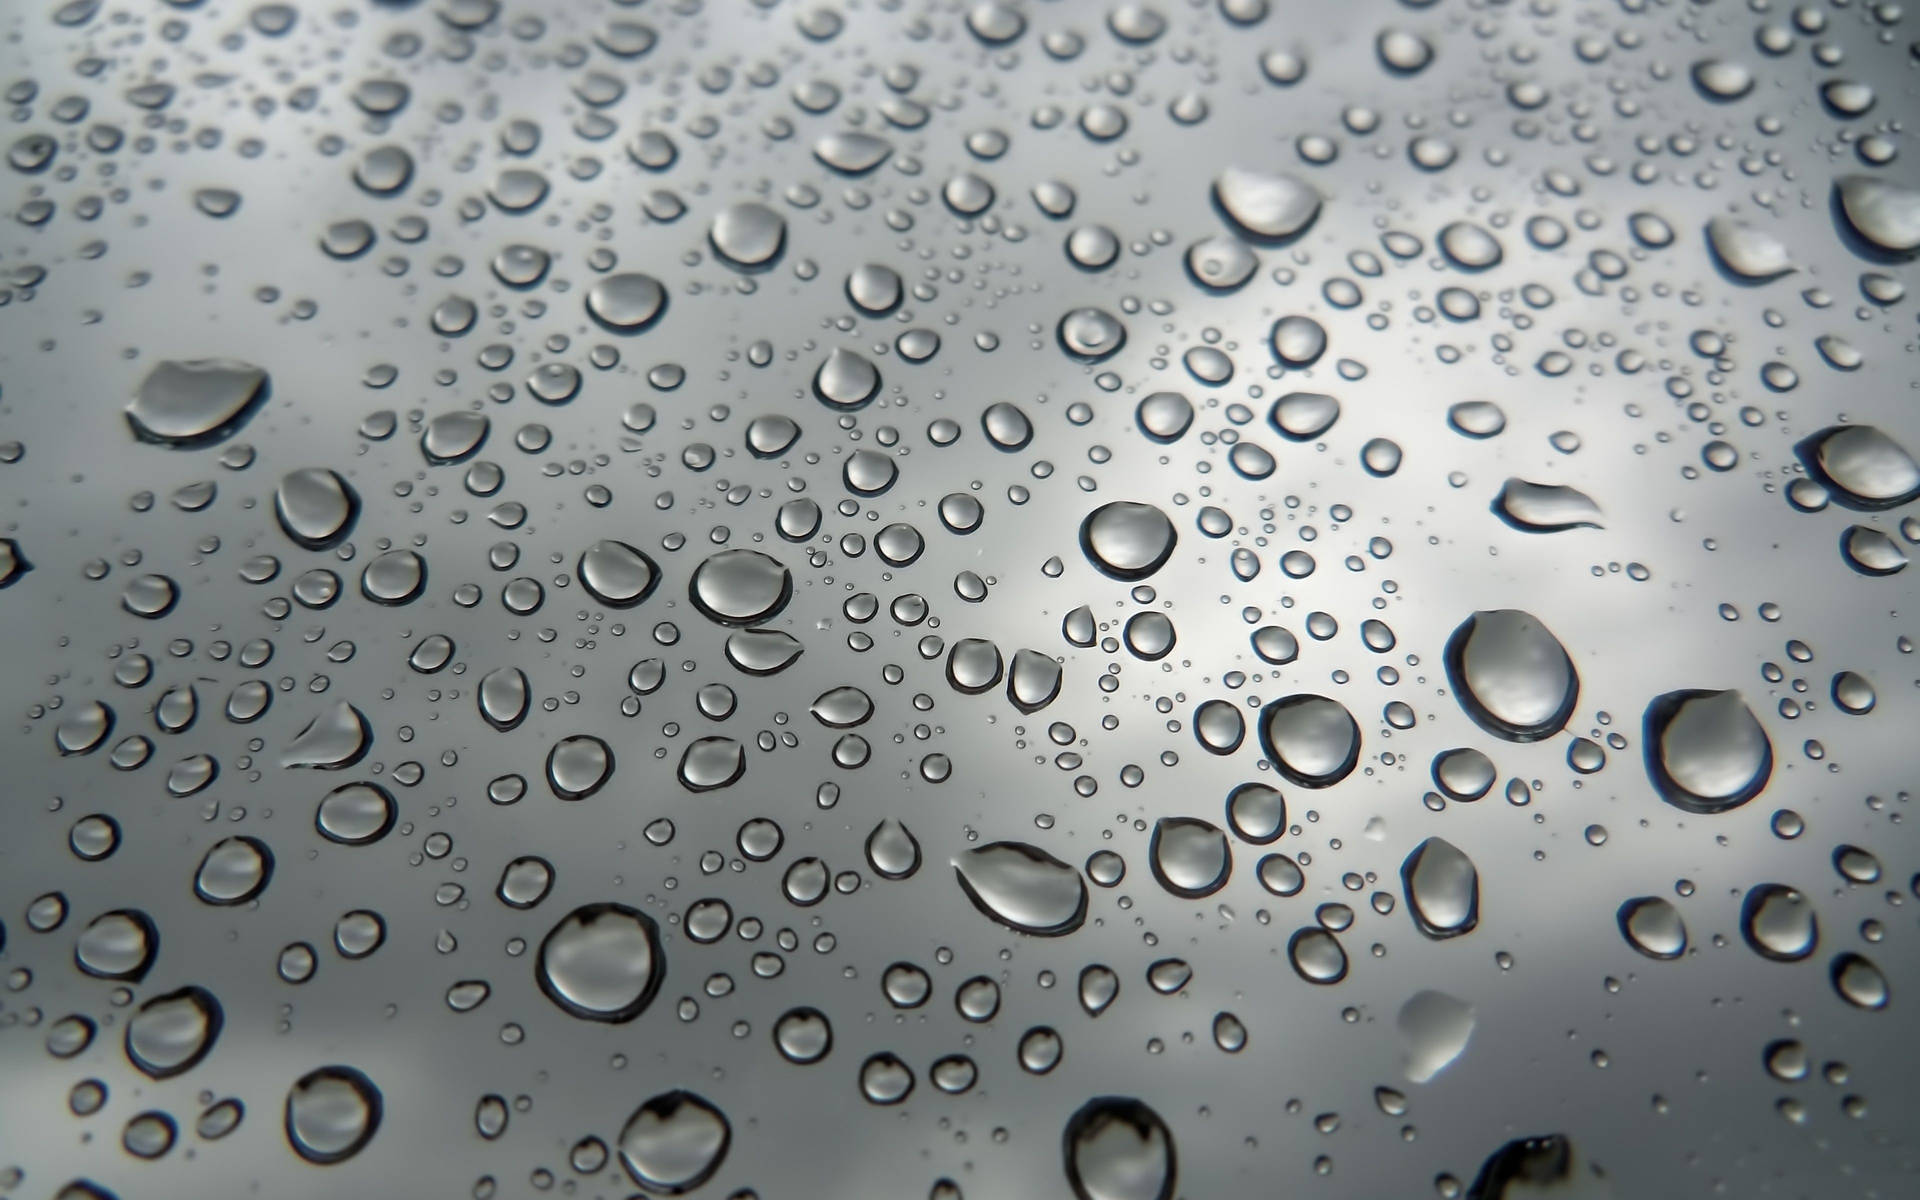 "Close-Up Detail of Raindrops on a Translucent Surface" Wallpaper